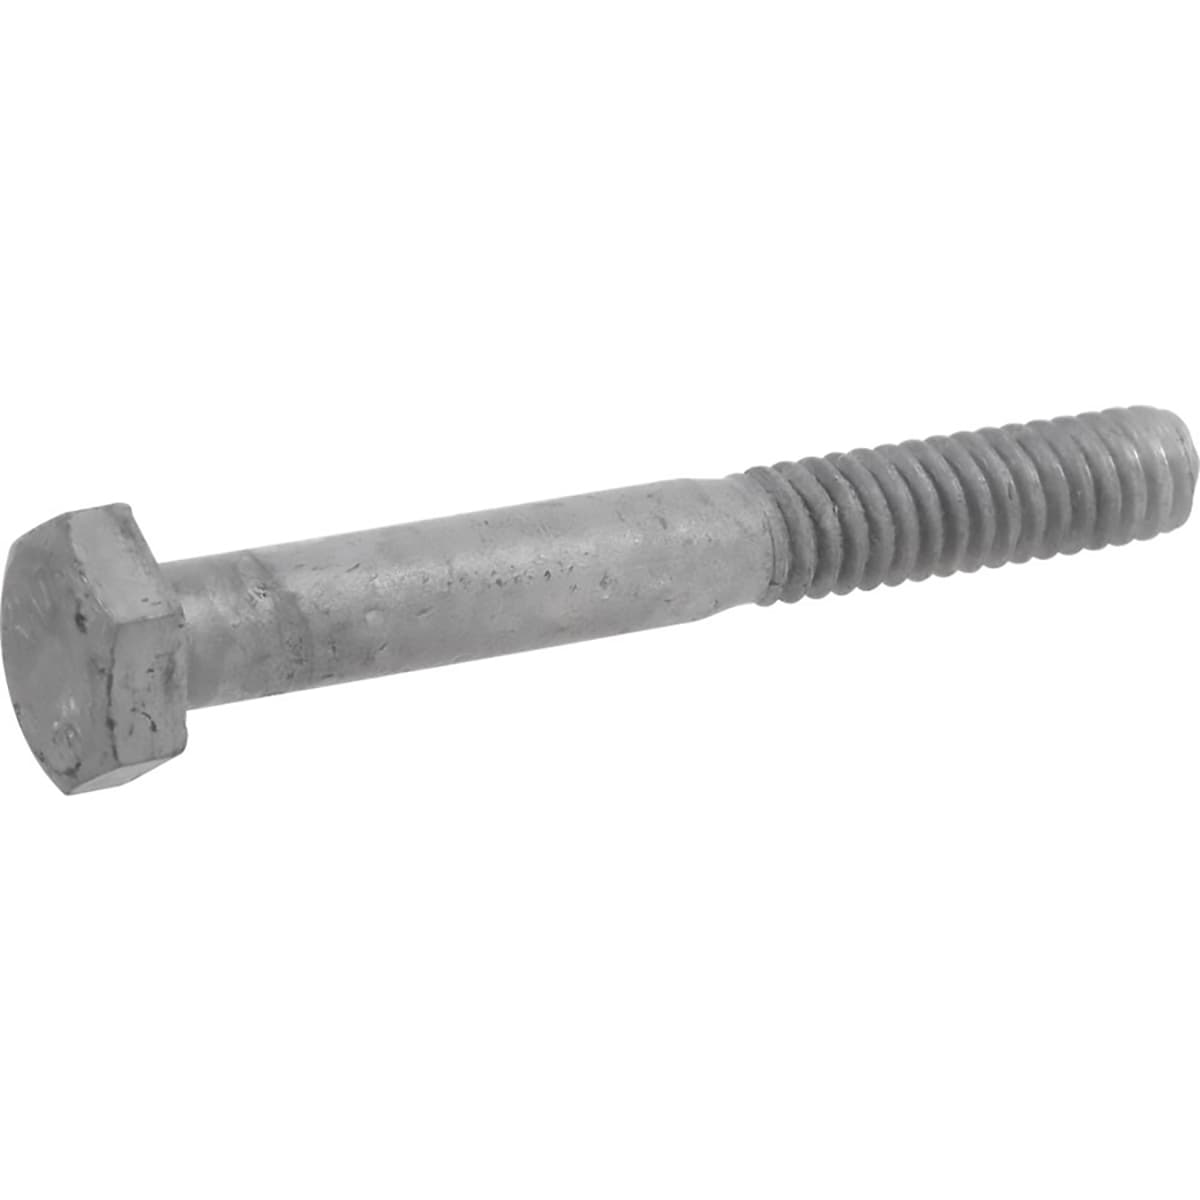 1/2-13 x 13" Carriage Bolts and Nuts Hot Dip Galvanized Quantity 25 